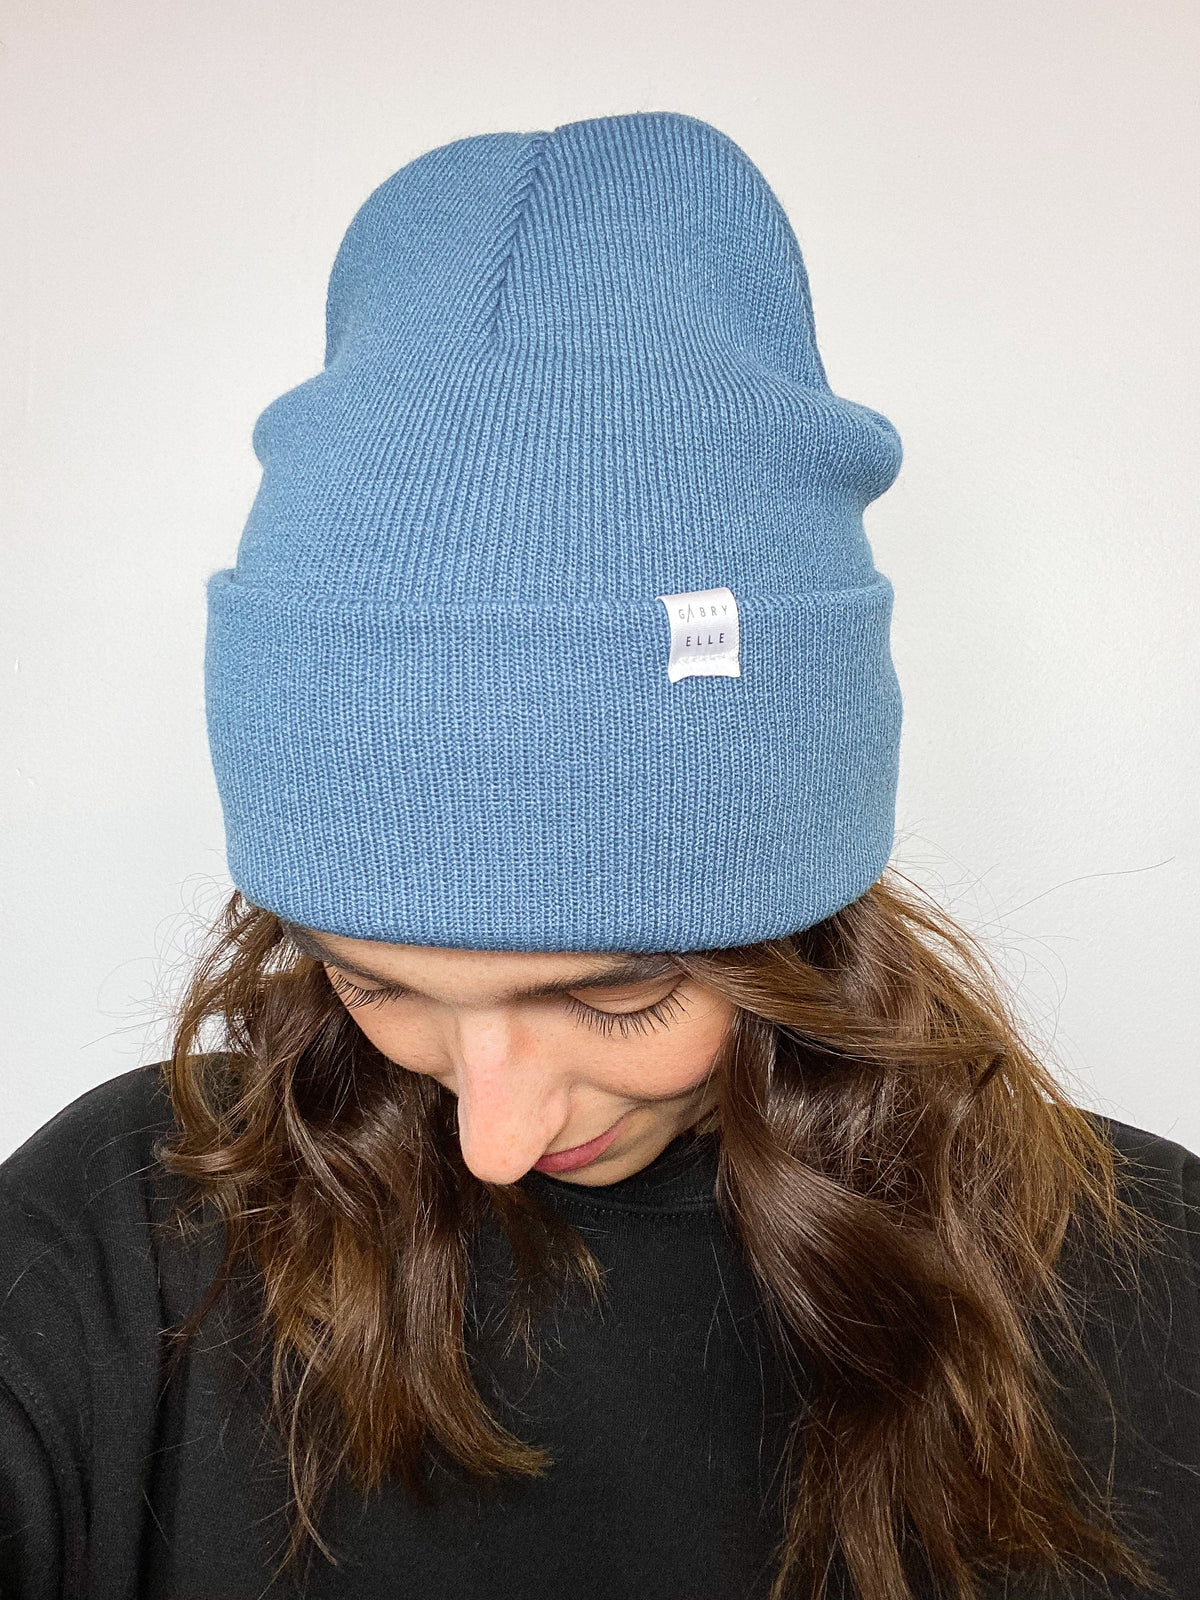 TUQUE - STEEL BLUE